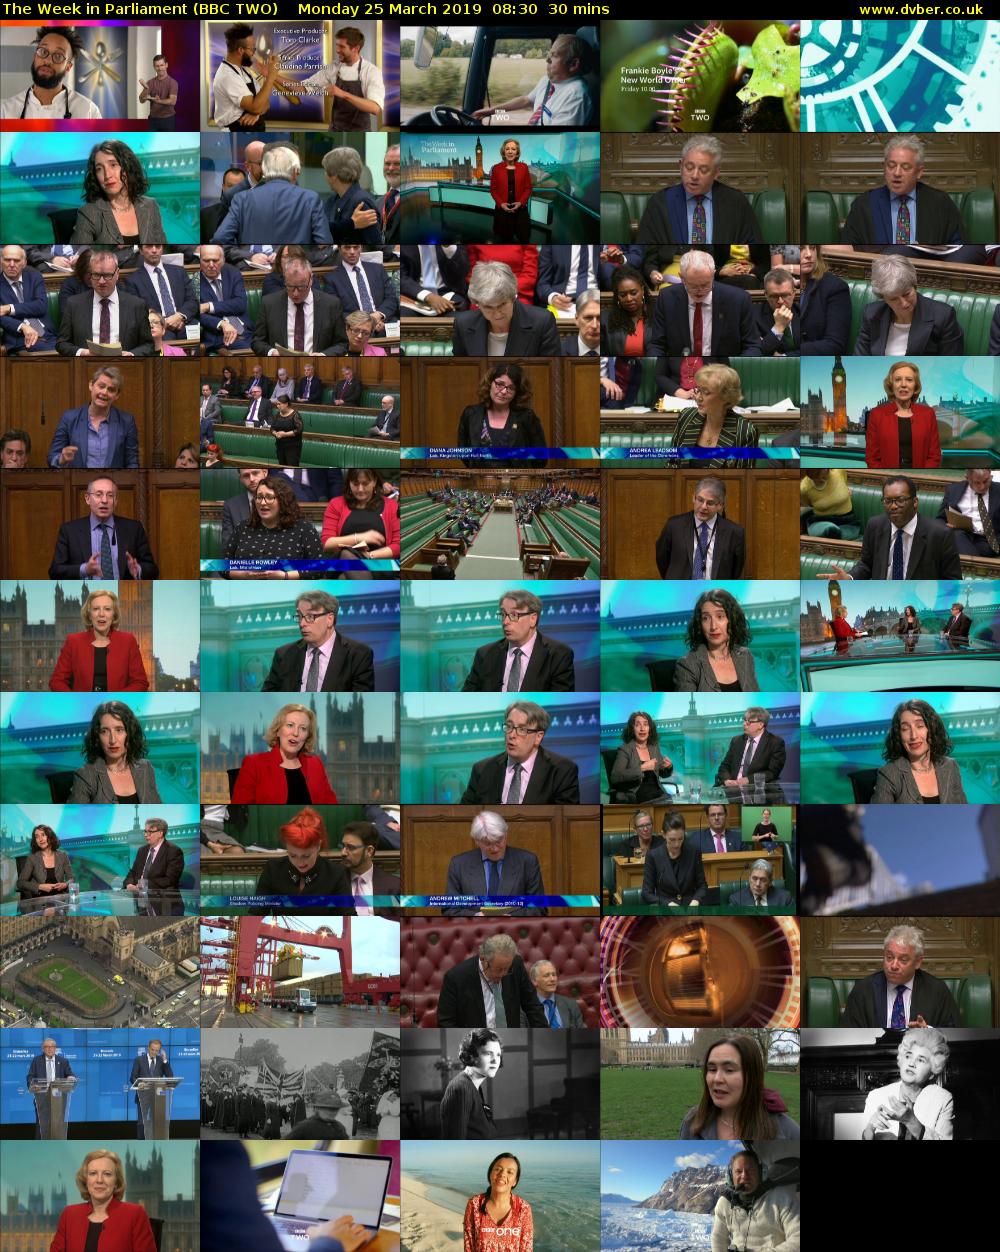 The Week in Parliament (BBC TWO) Monday 25 March 2019 08:30 - 09:00